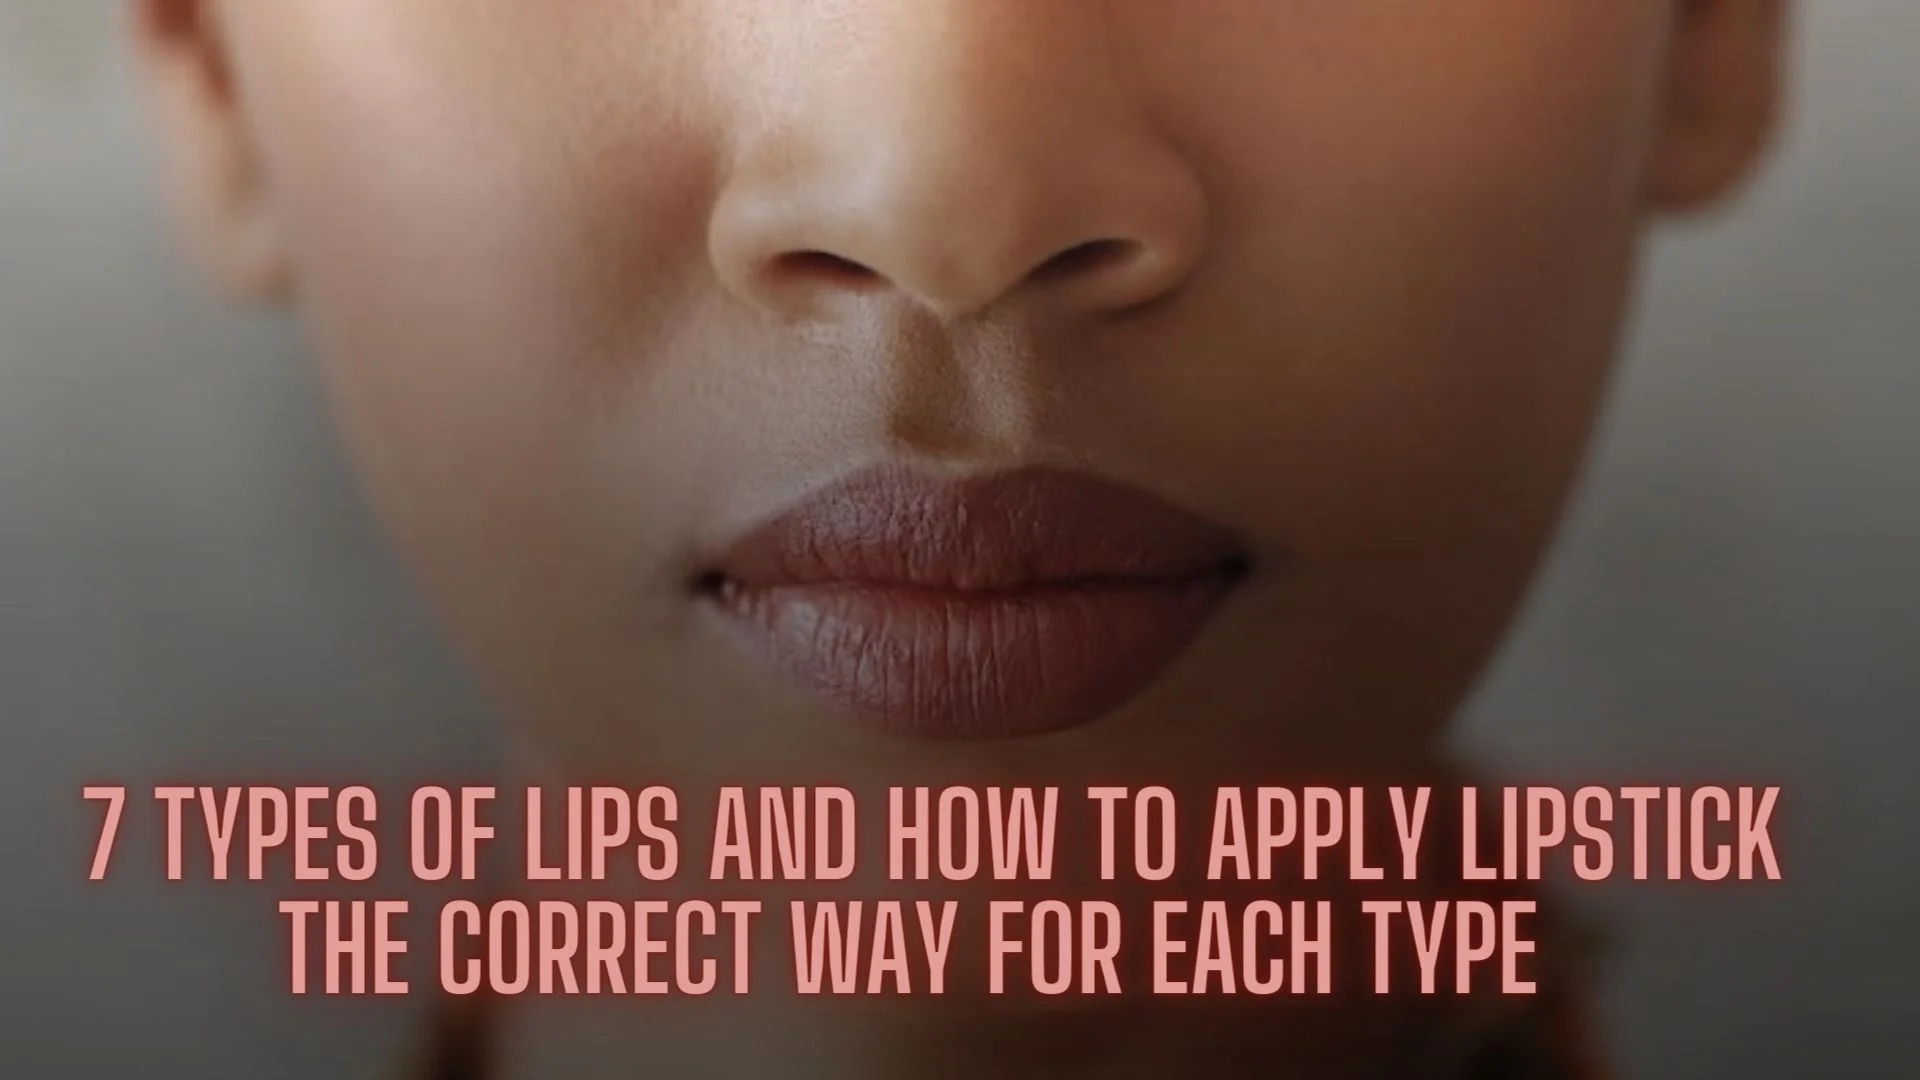 7 TYPES OF LIPS AND HOW TO APPLY LIPSTICK THE CORRECT WAY FOR EACH TYPE